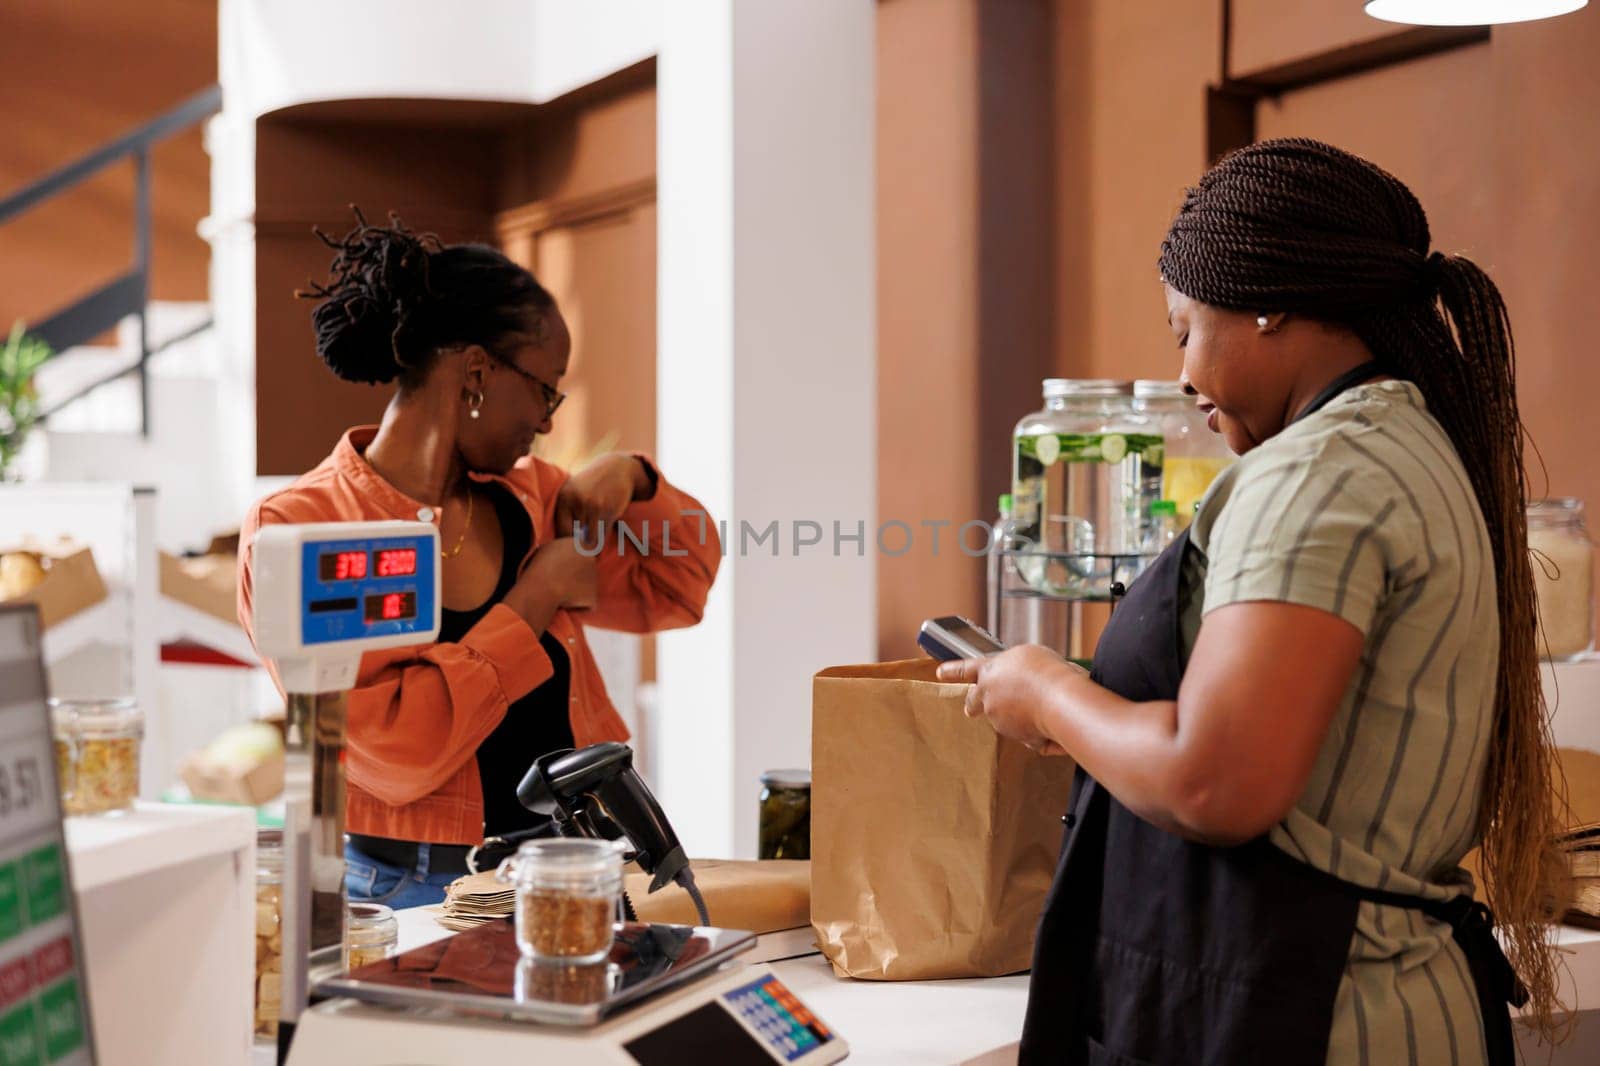 After paying for bio food items she selected at an eco friendly shop, black woman puts her credit card back in her pocket. At checkout counter, merchant and client complete a cashless transaction.